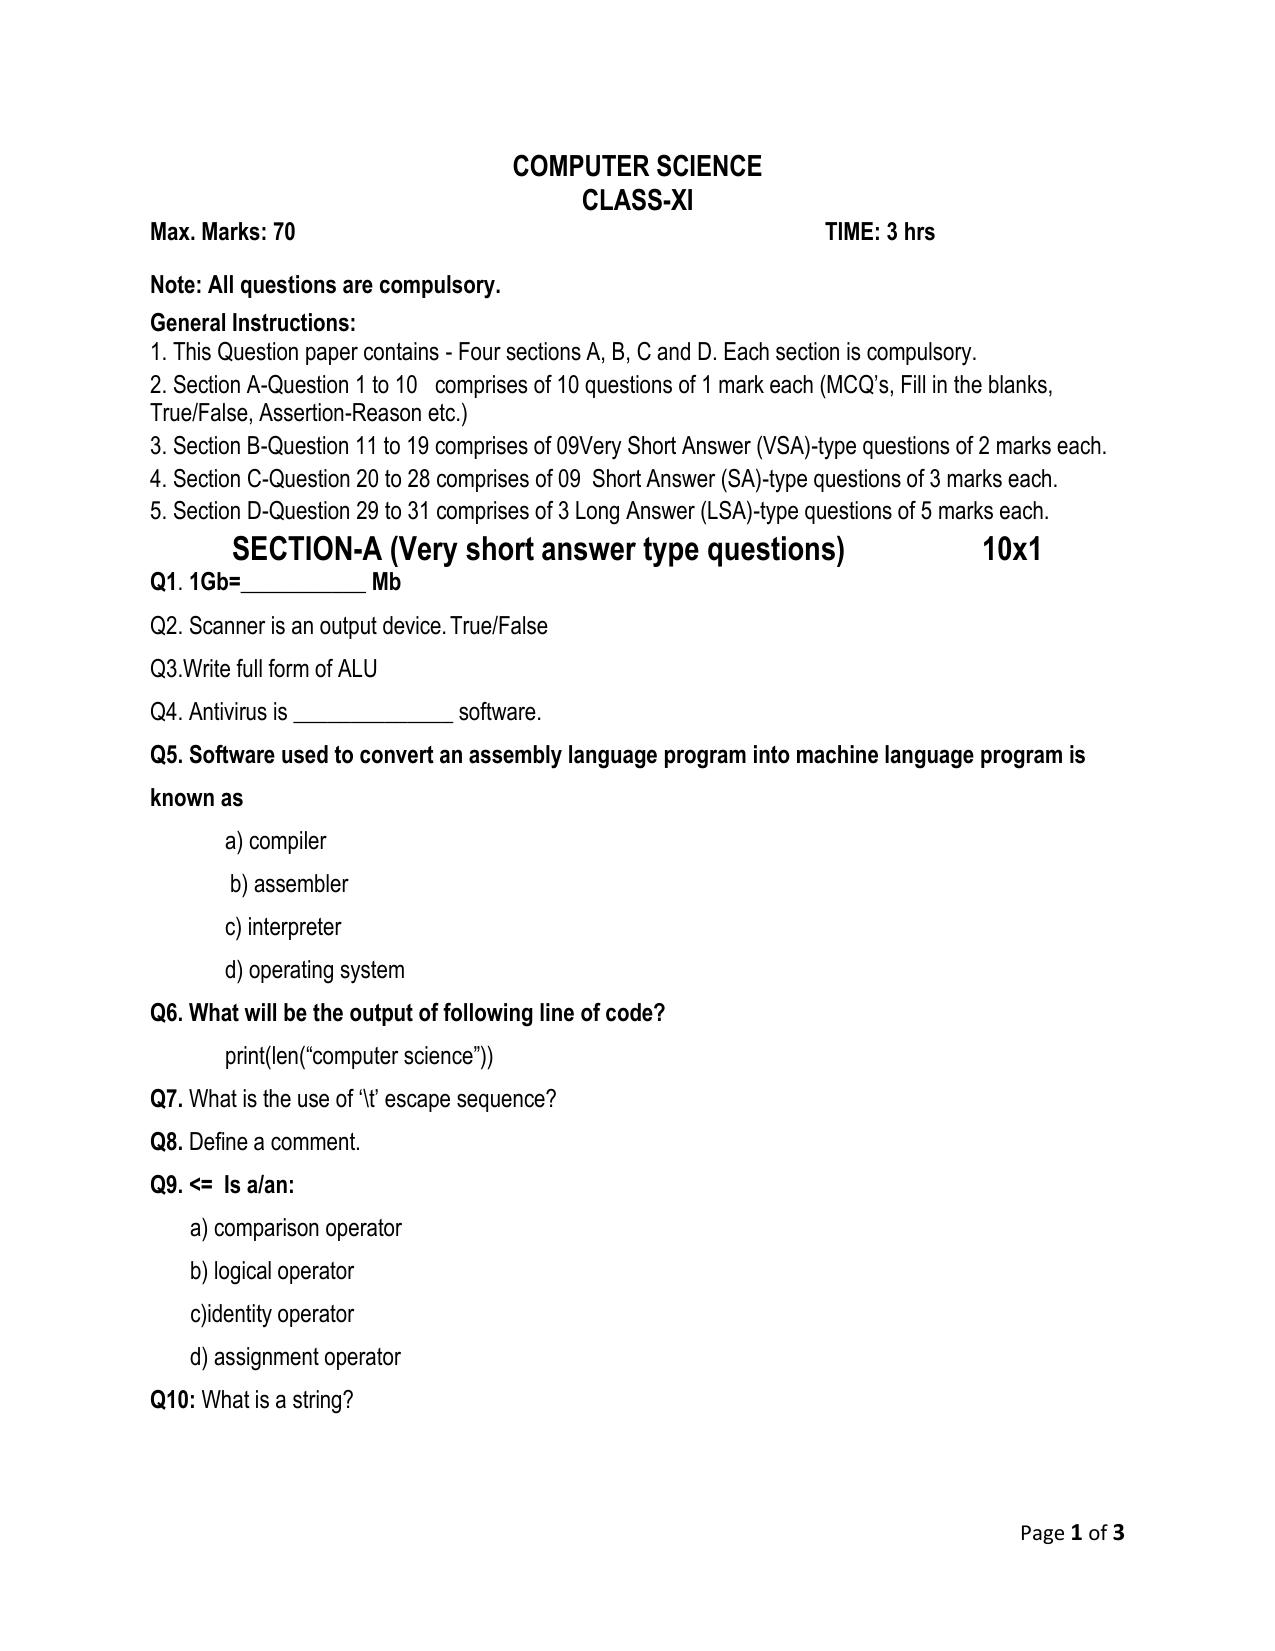 JKBOSE Class 11 COMPUTER SCIENCE Model Question Paper - Page 1